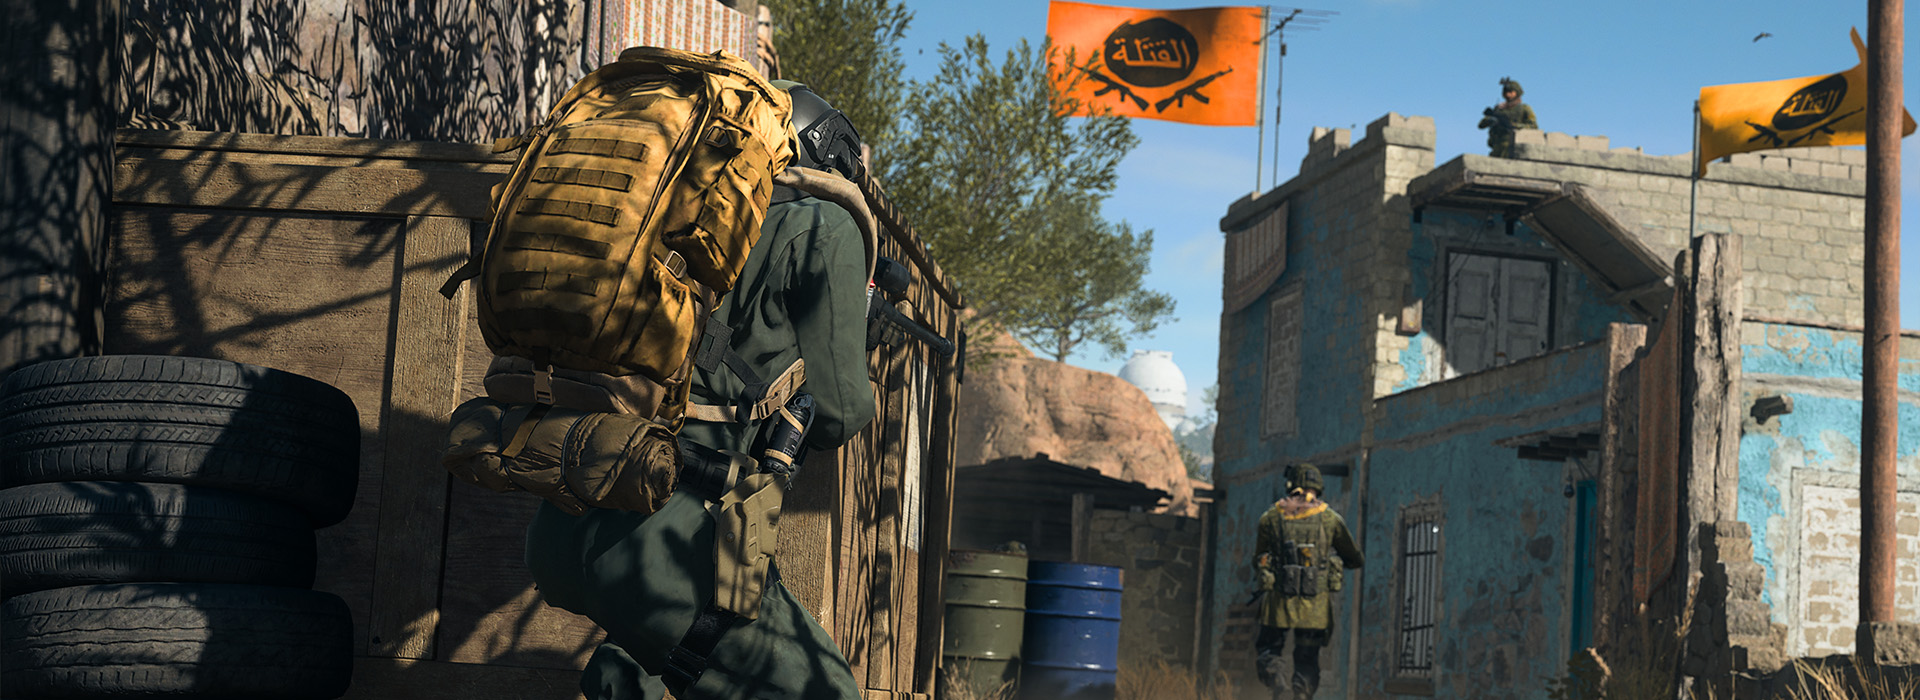 The new meta arrives with the Call of Duty: Modern Warfare II & Warzone 2.0  patch notes — GAMINGTREND